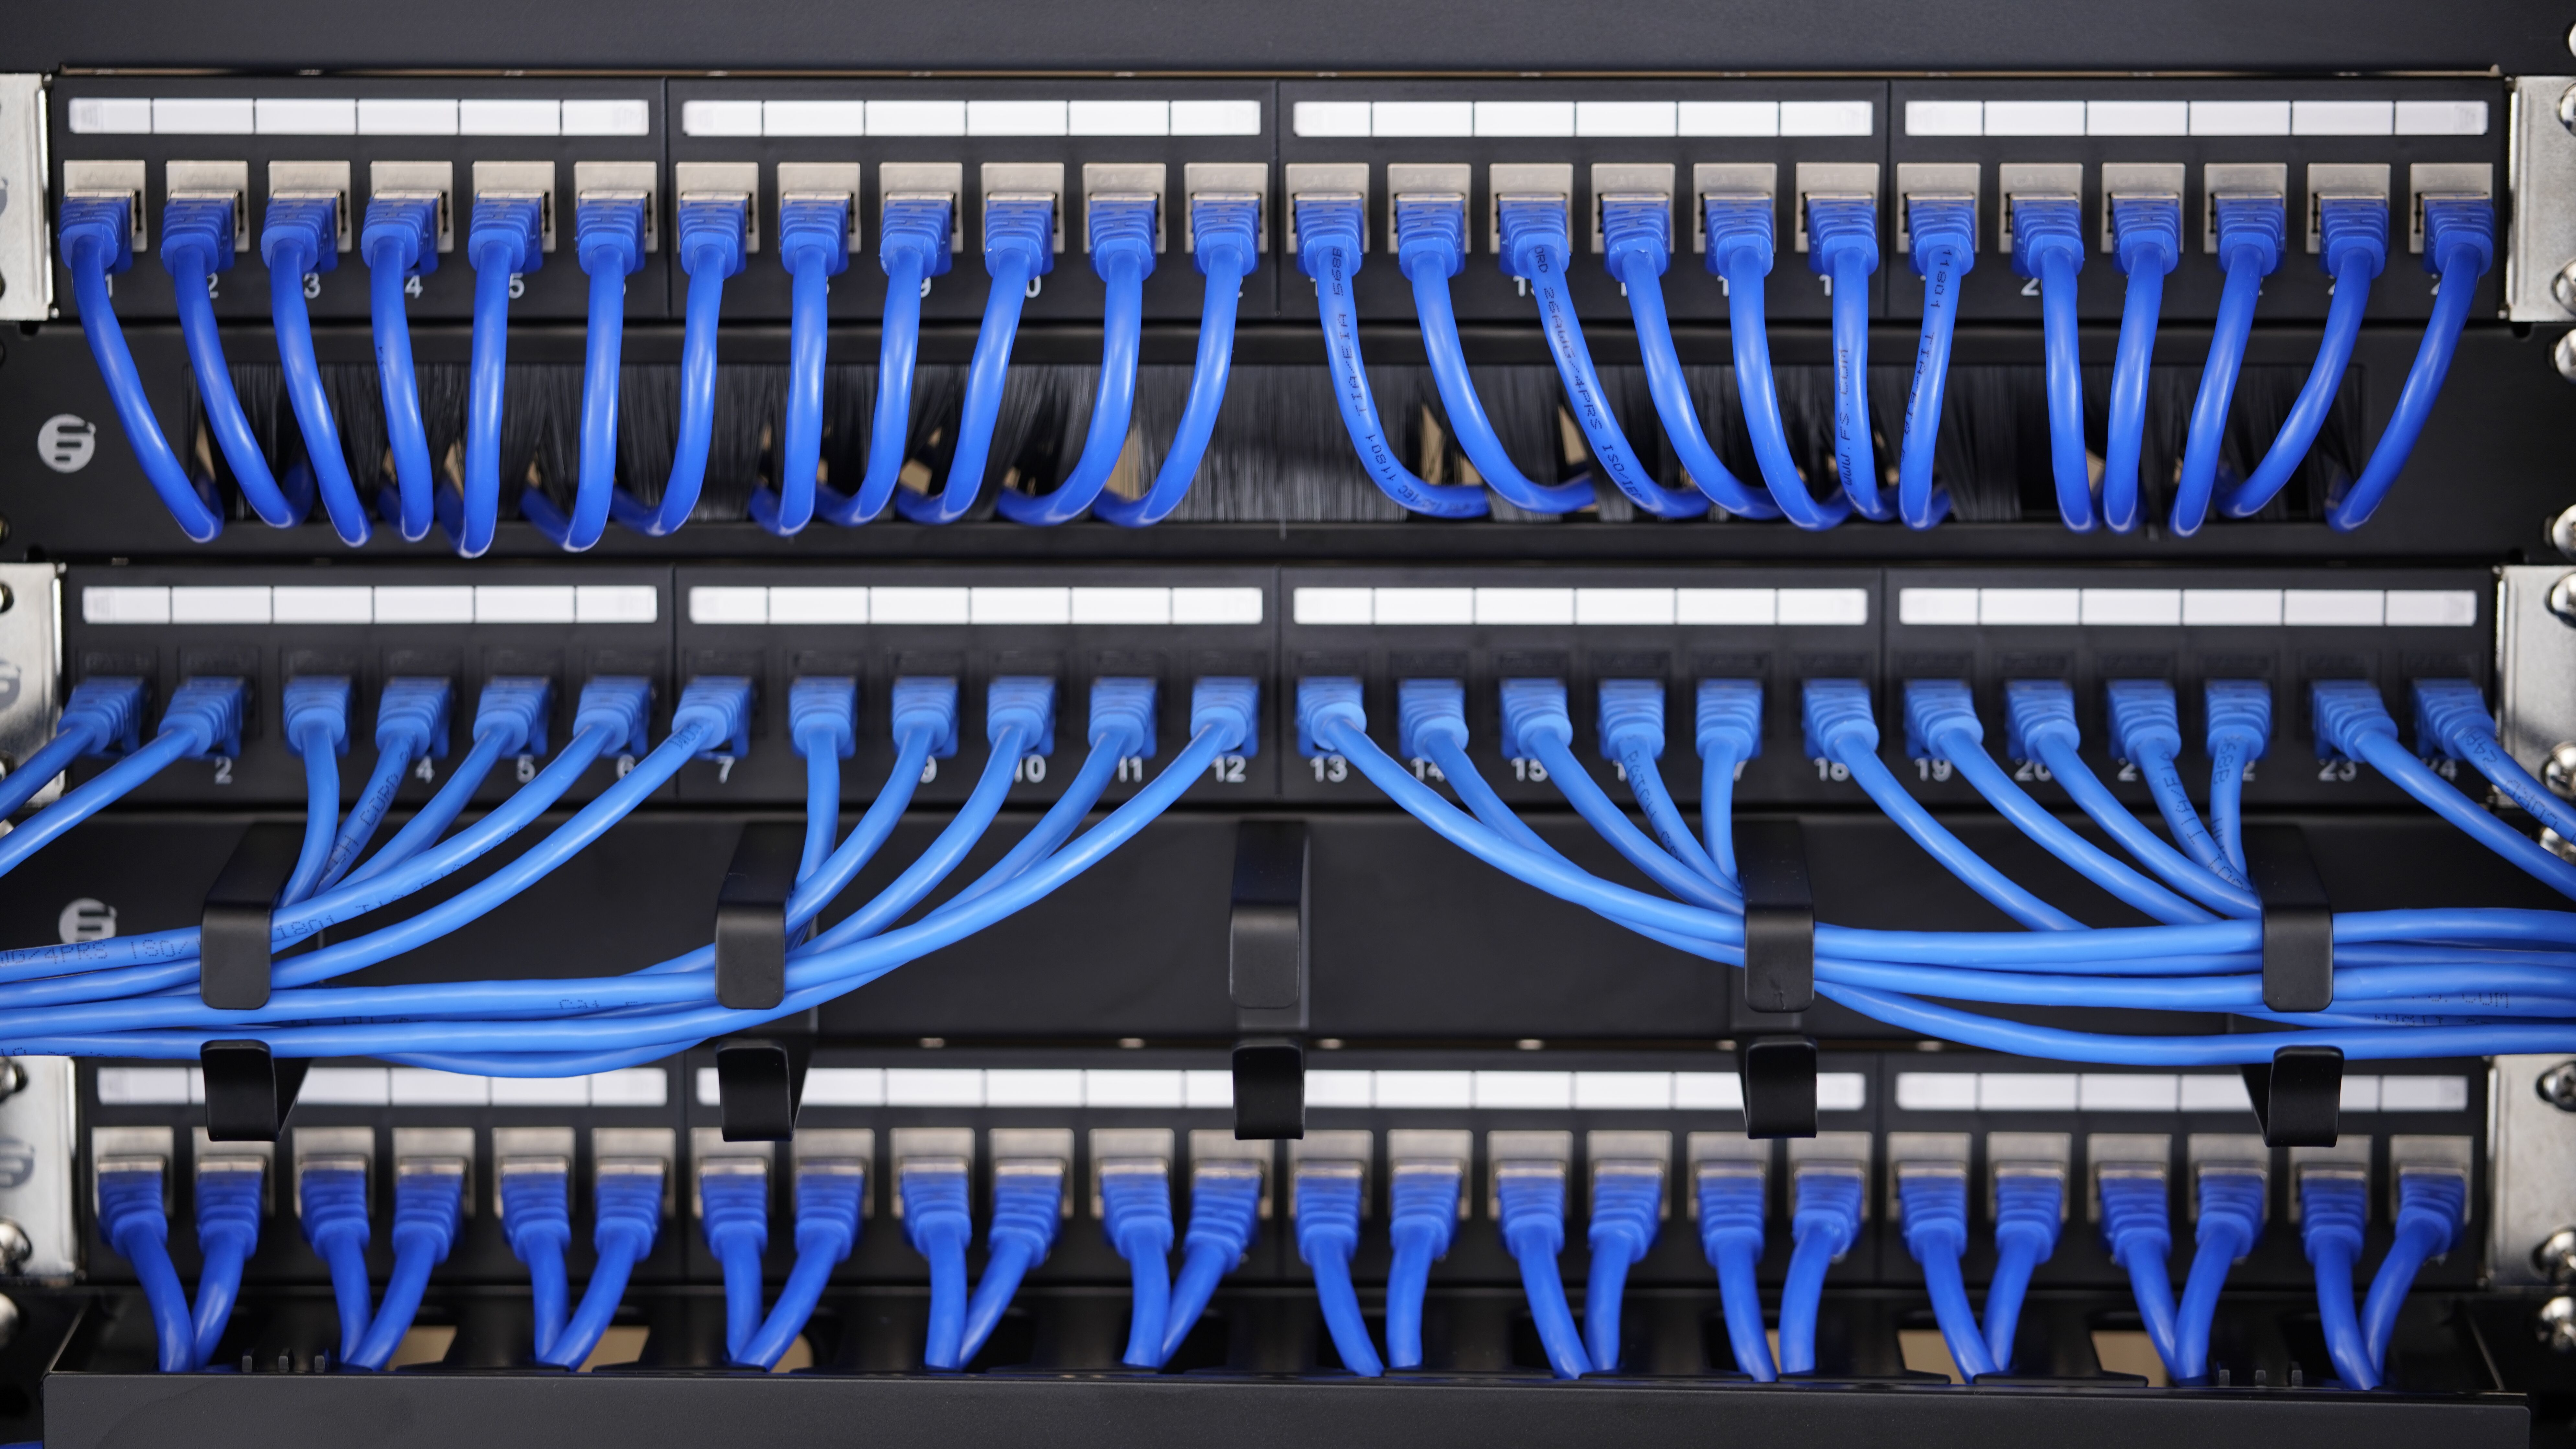 cable patch panel